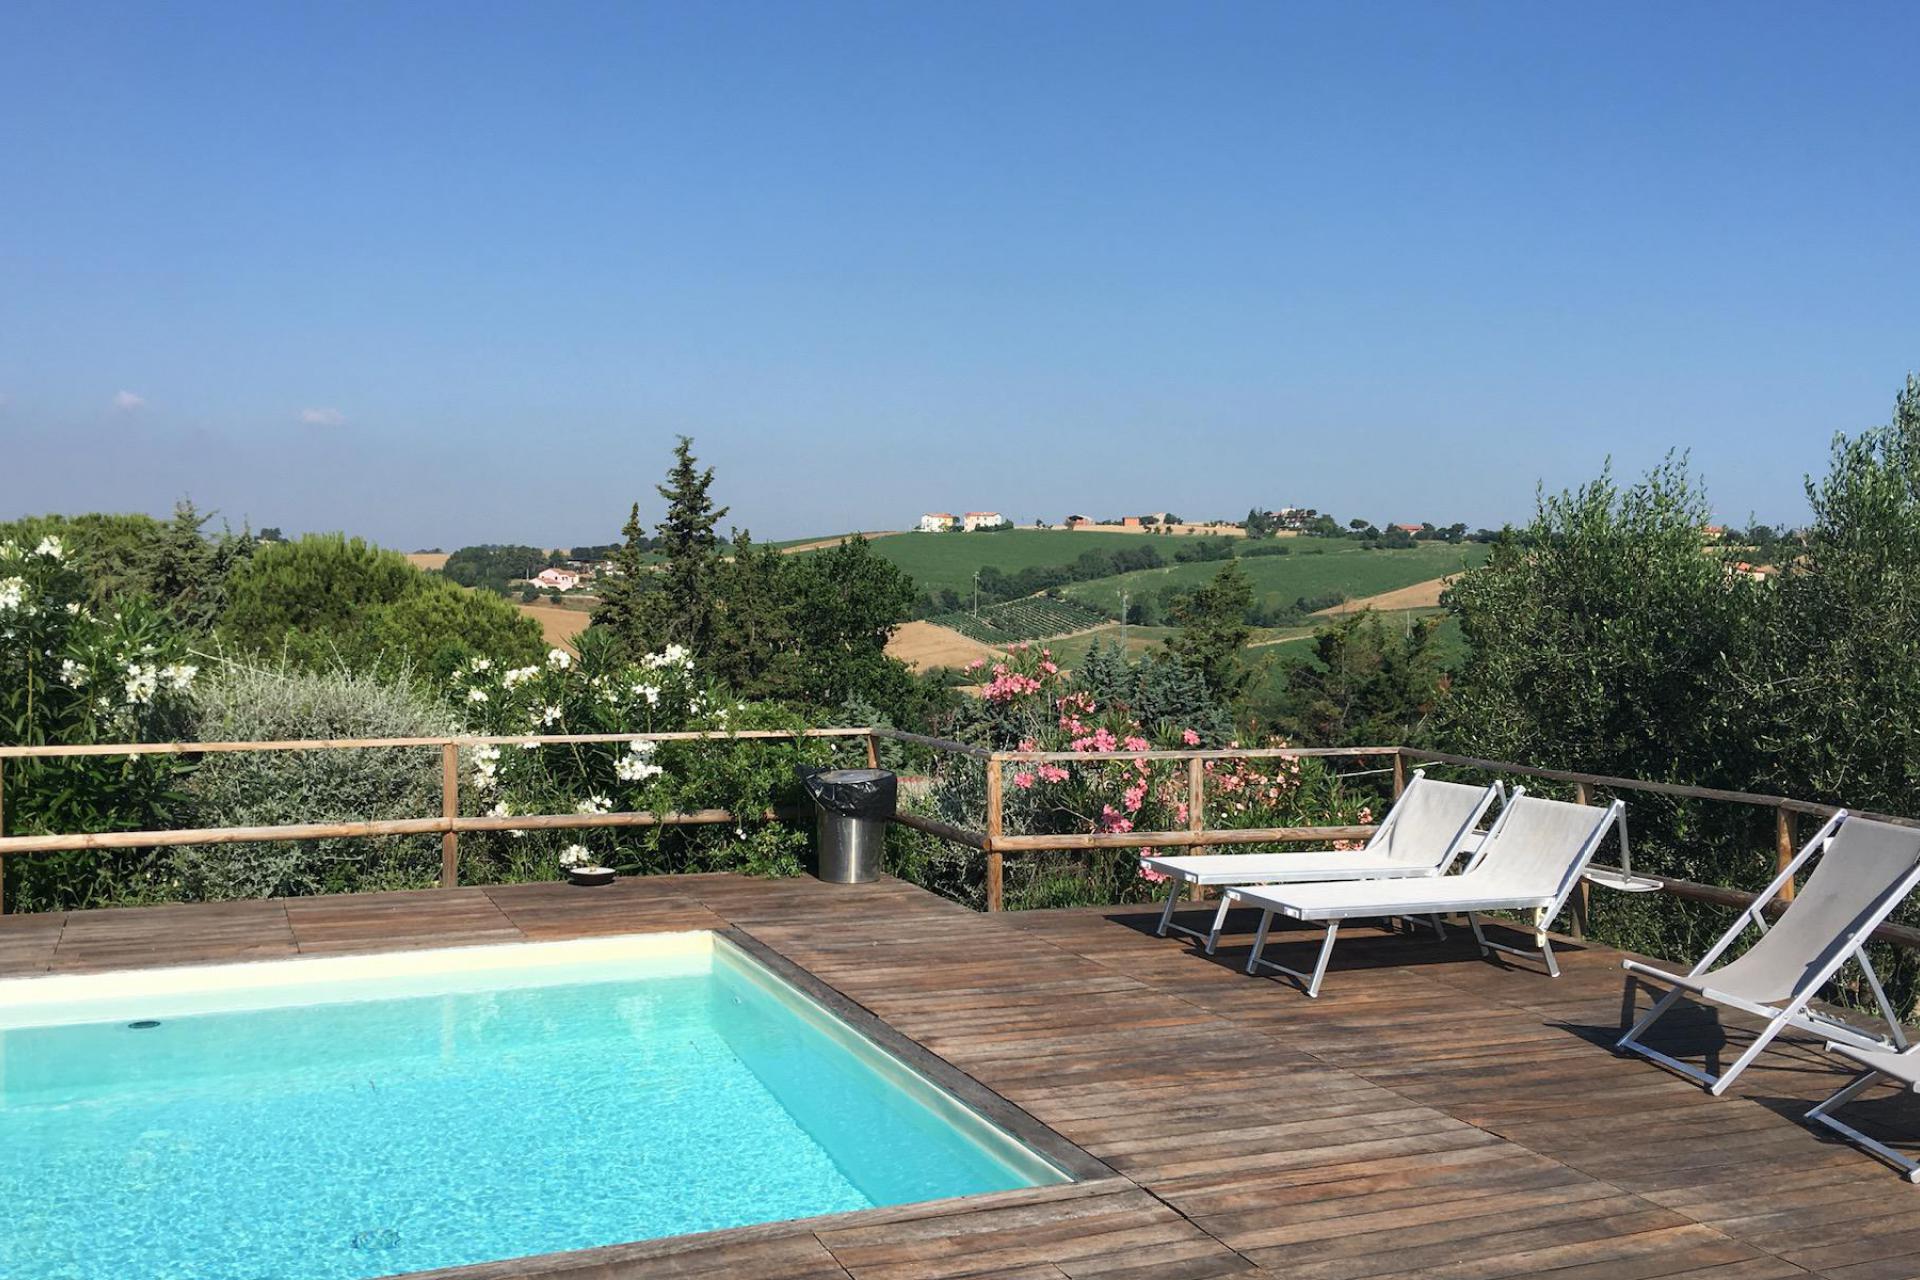 Nice B&B surrounded by olive trees in Le Marche